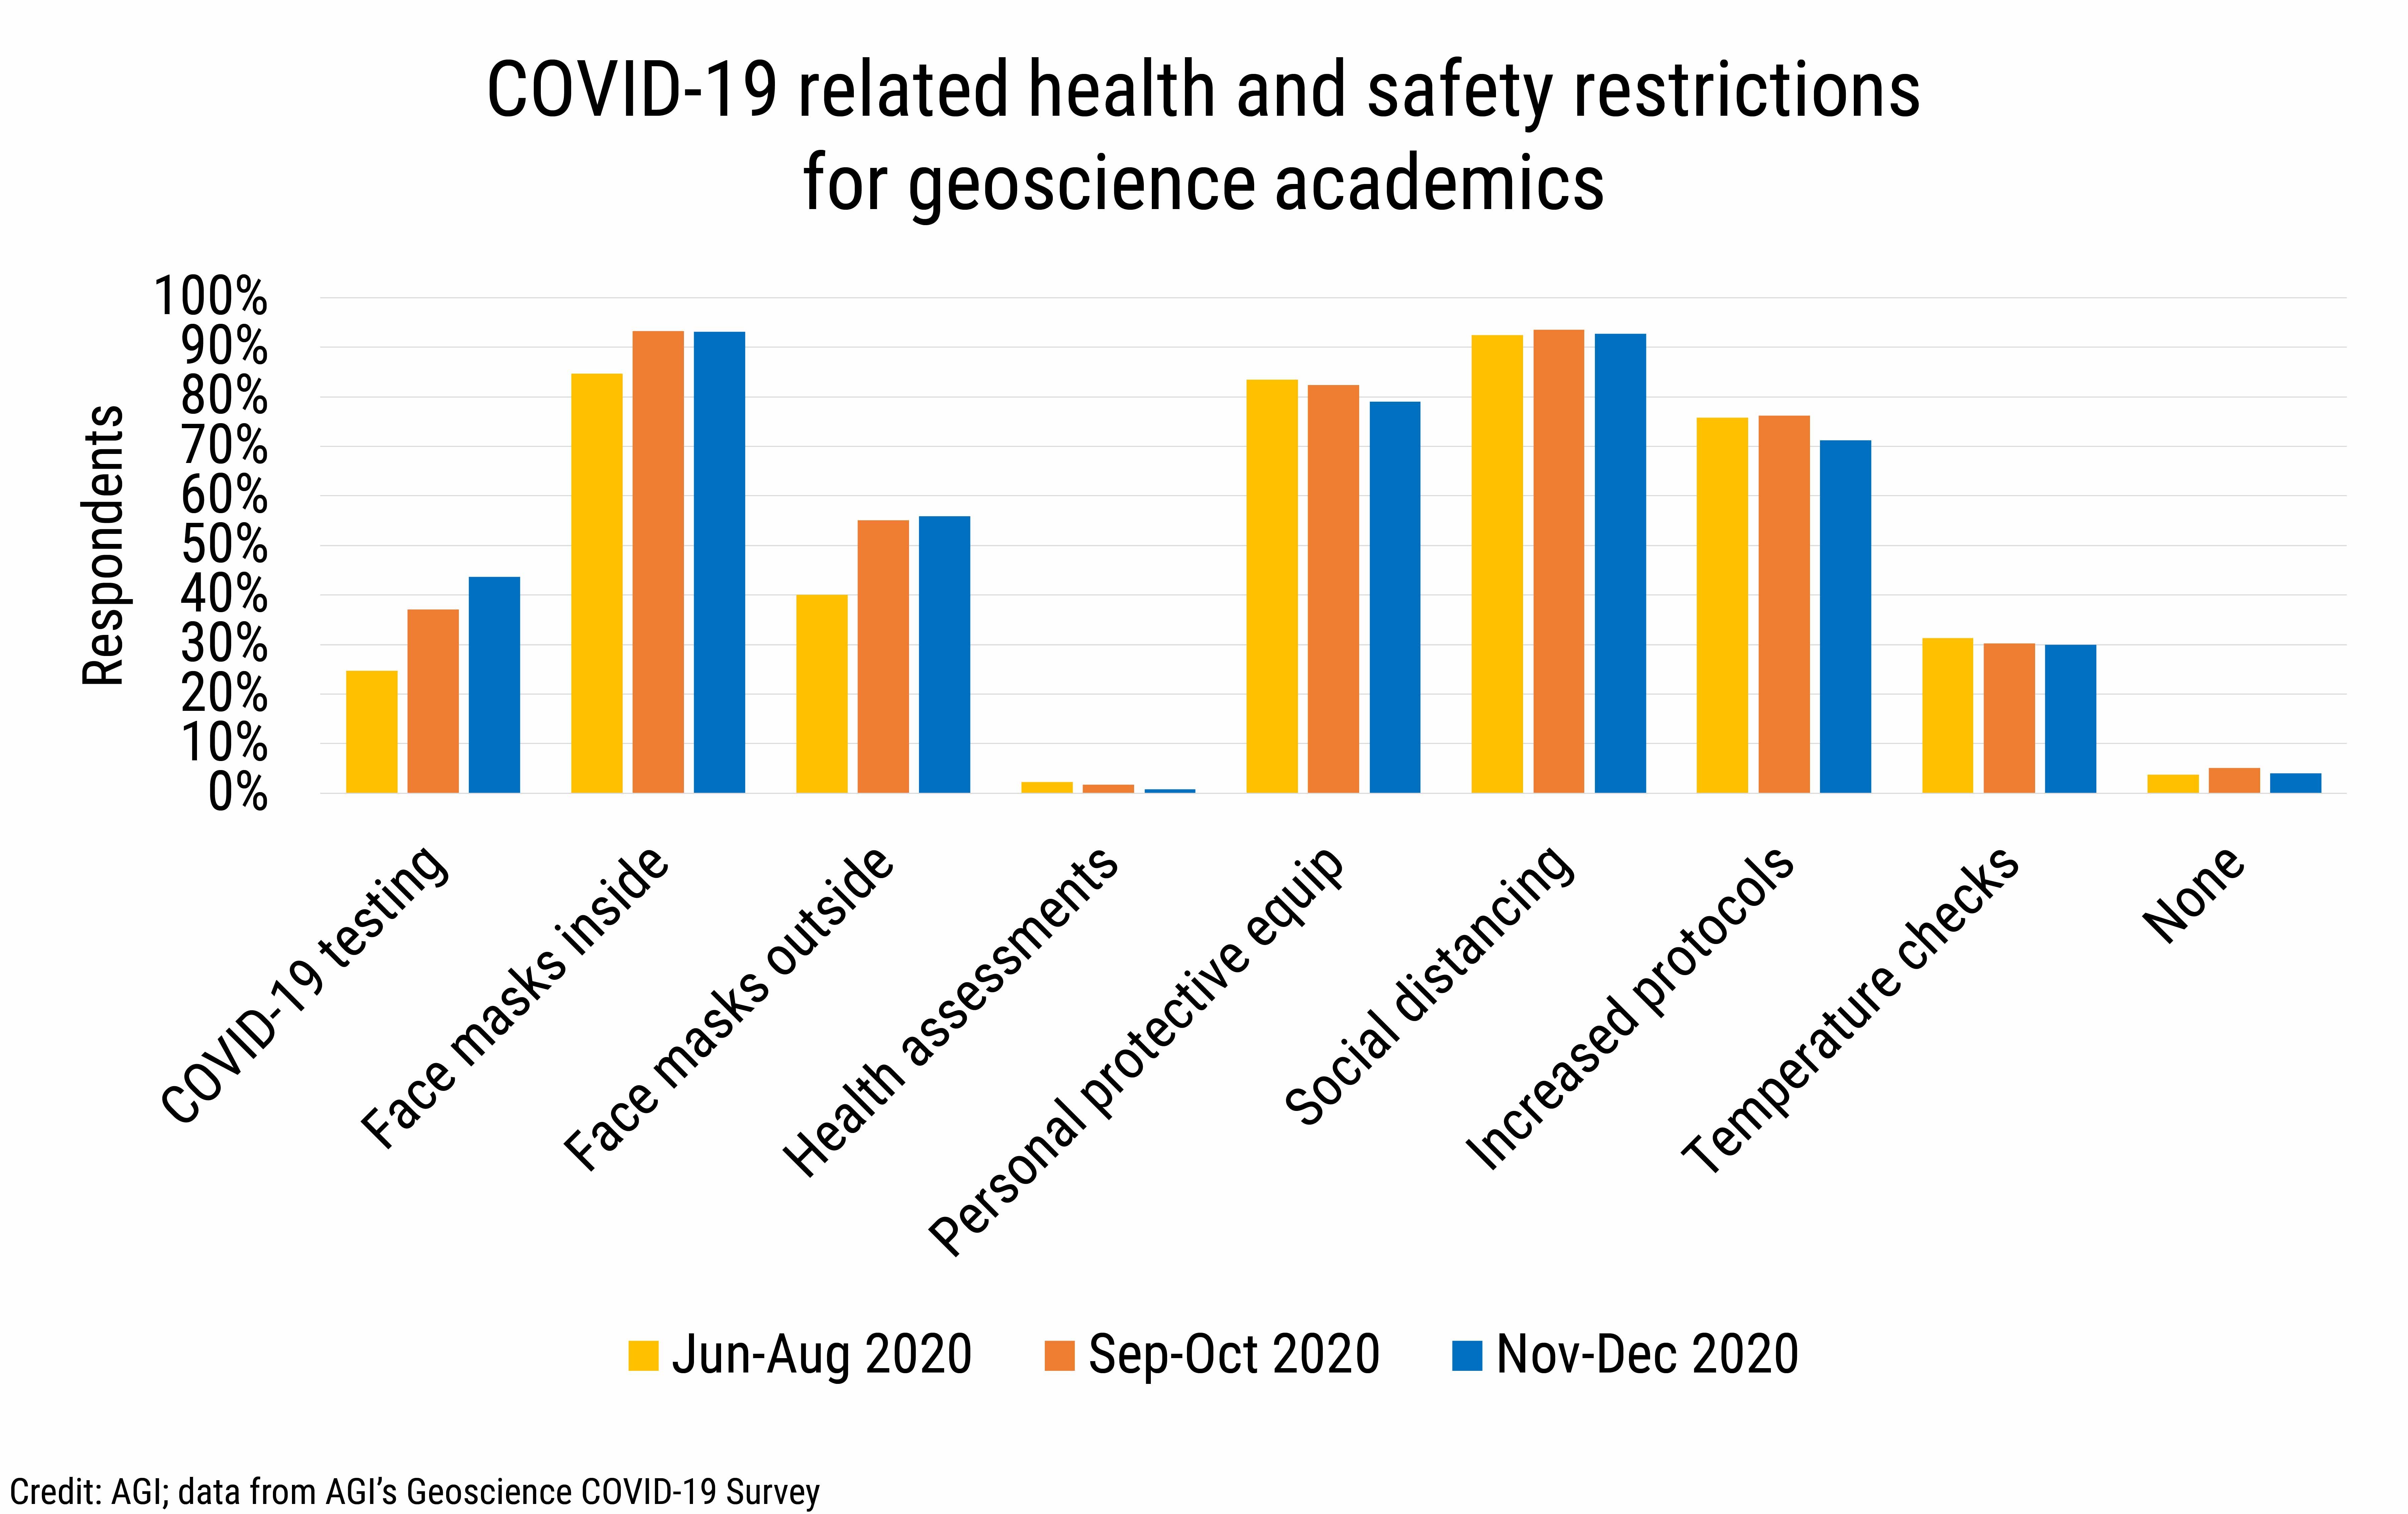 DB_2021-002 chart 06: COVID-19 related health and safety restrictions for geoscience academics (Credit: AGI; data from AGI's Geoscience COVID-19 Survey)